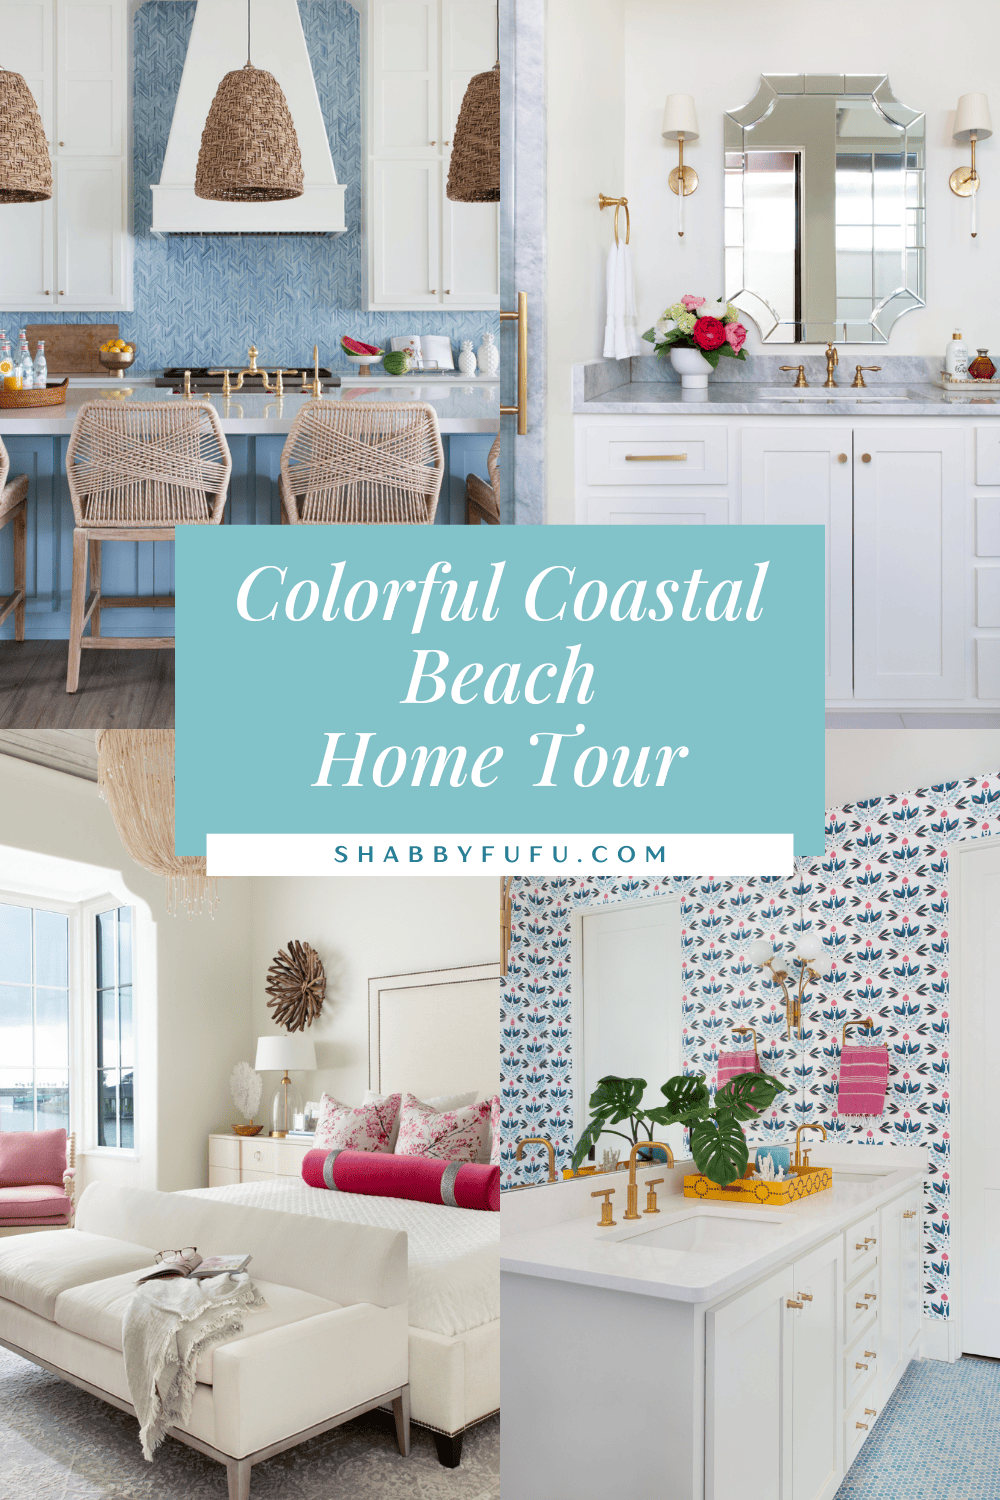 Pinterest graphic featuring a collage of a coastal home with a title that reads "Colorful Coastal Beach Home Tour"